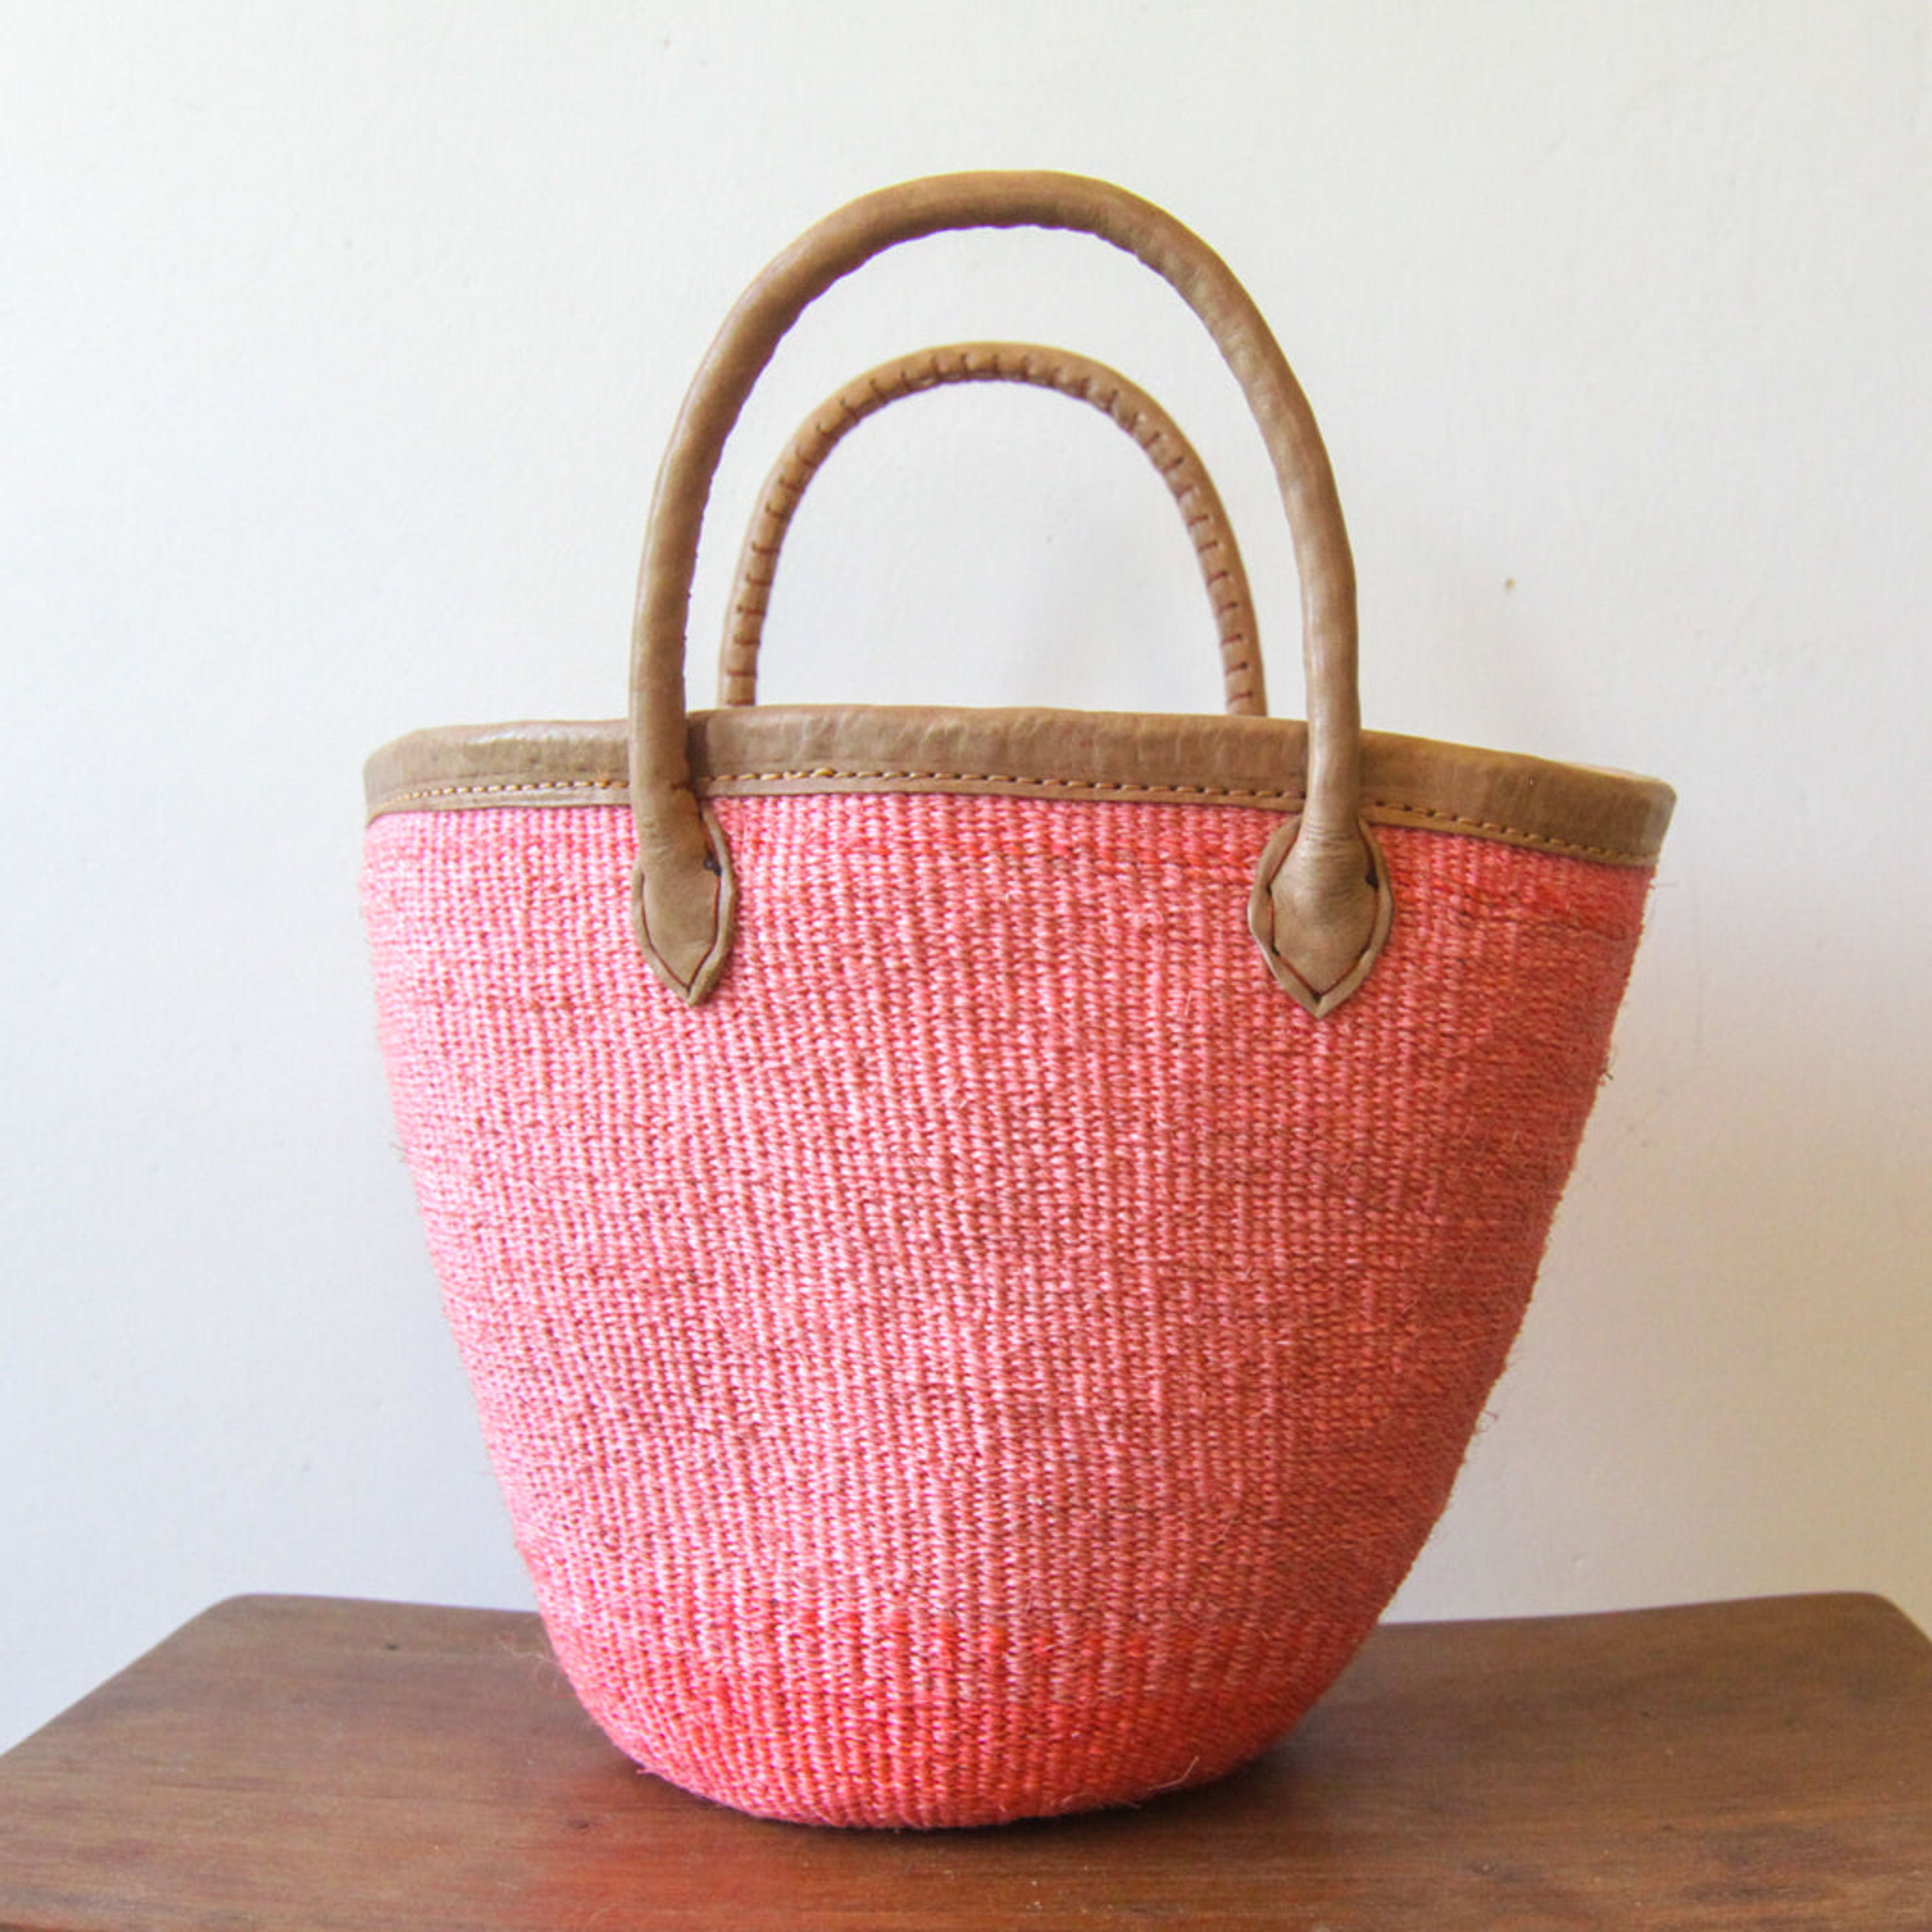 Baby darling . basket bag . leather . sisal . fineweave . one-of-a-kind . 106